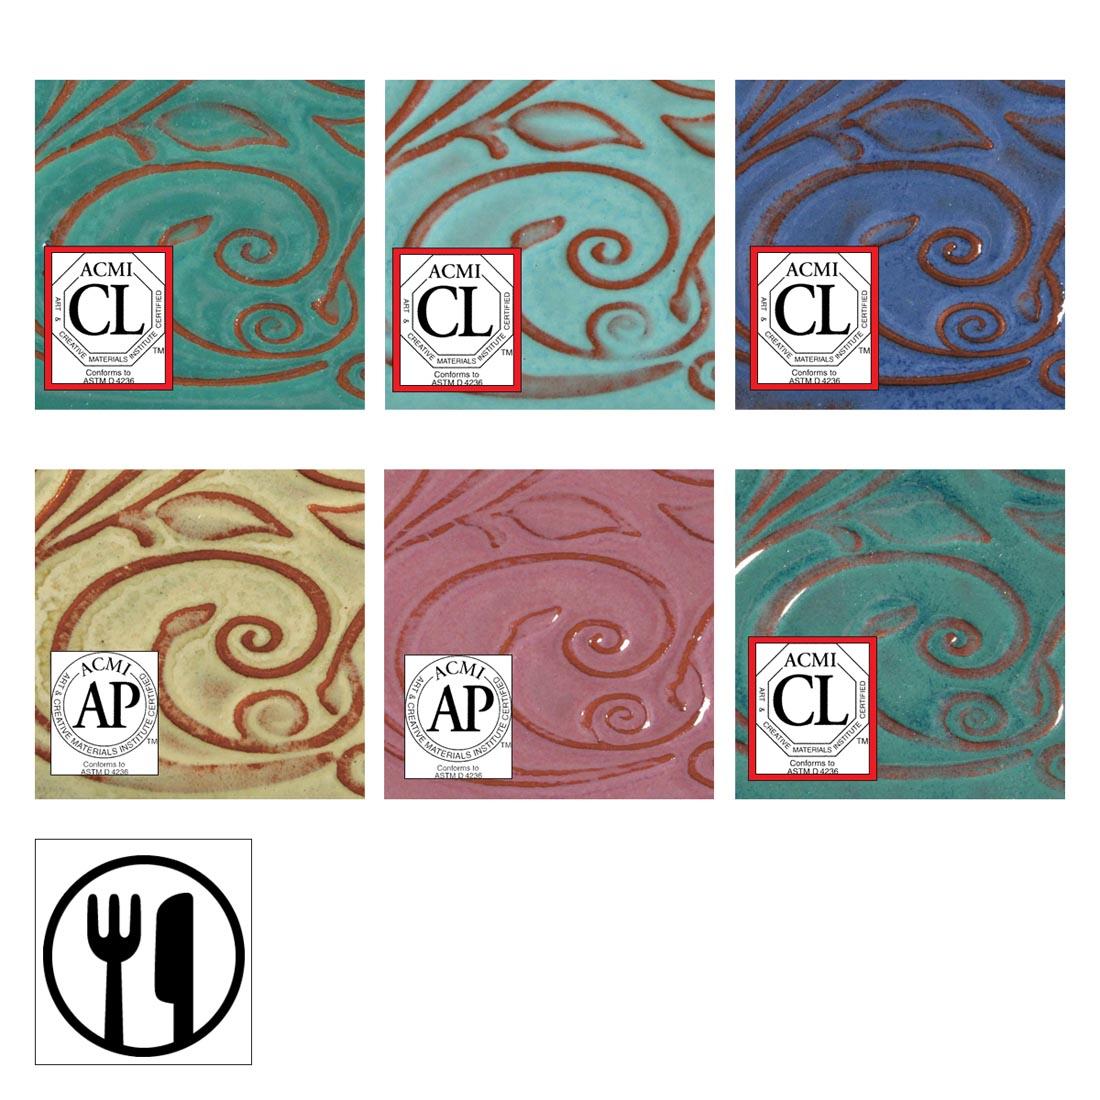 clay tiles with AMACO Opalescent Glazes applied each overlaid with their own health seals